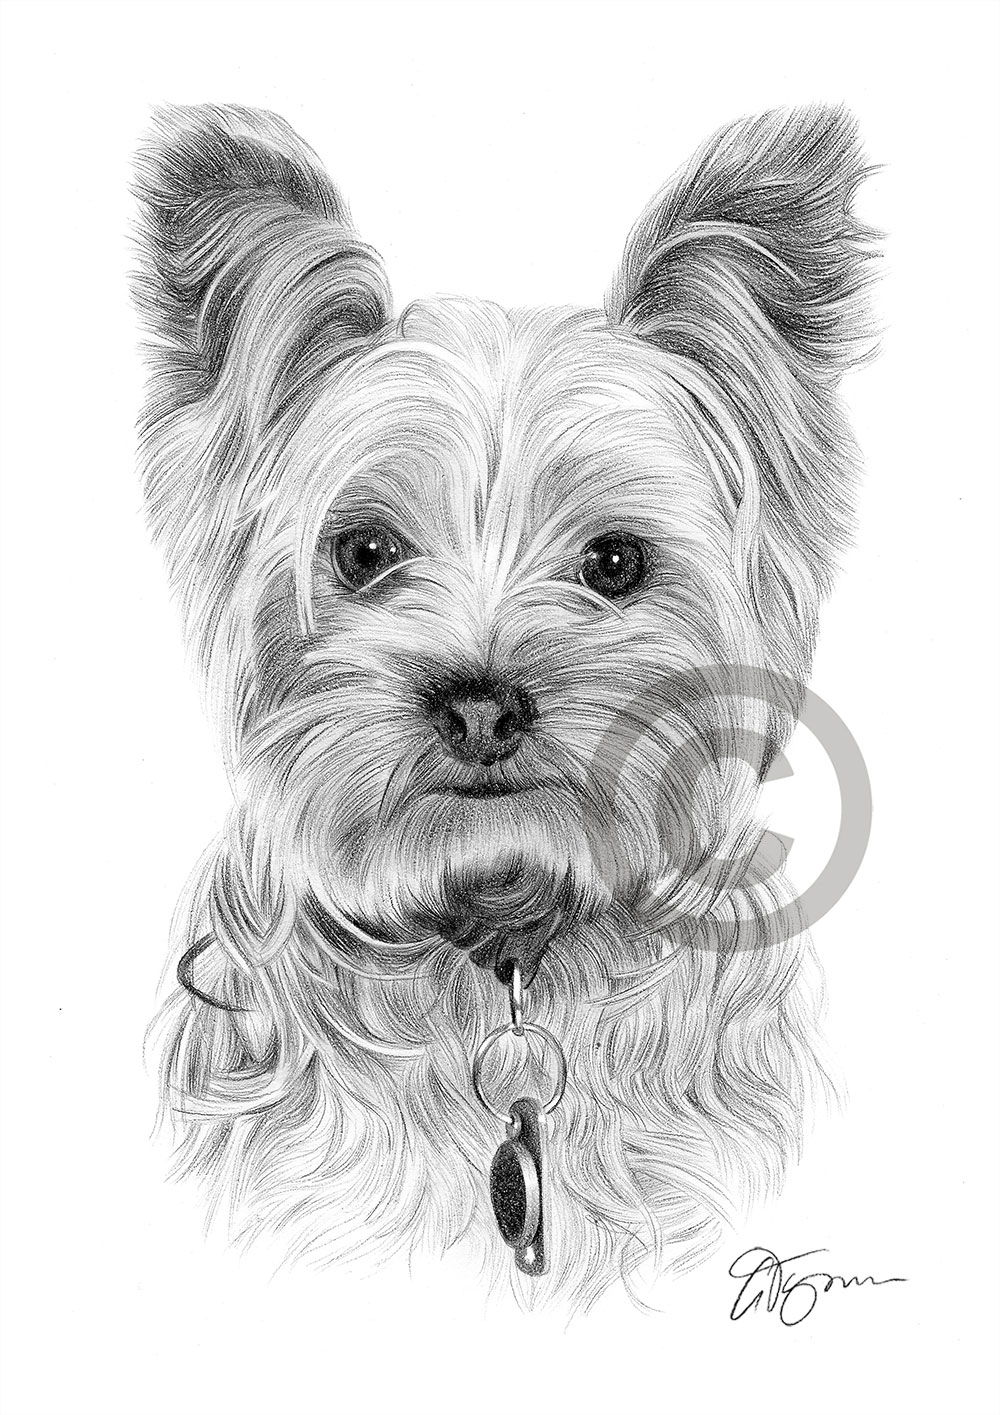 YORKSHIRE TERRIER art print A4 A3 sizes pencil drawing